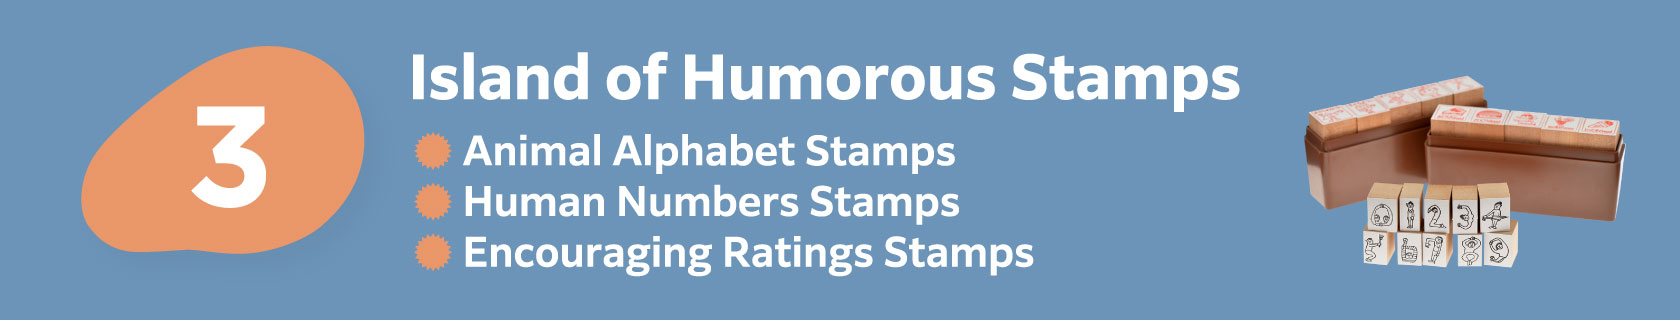 3 Island of Humorous Stamps